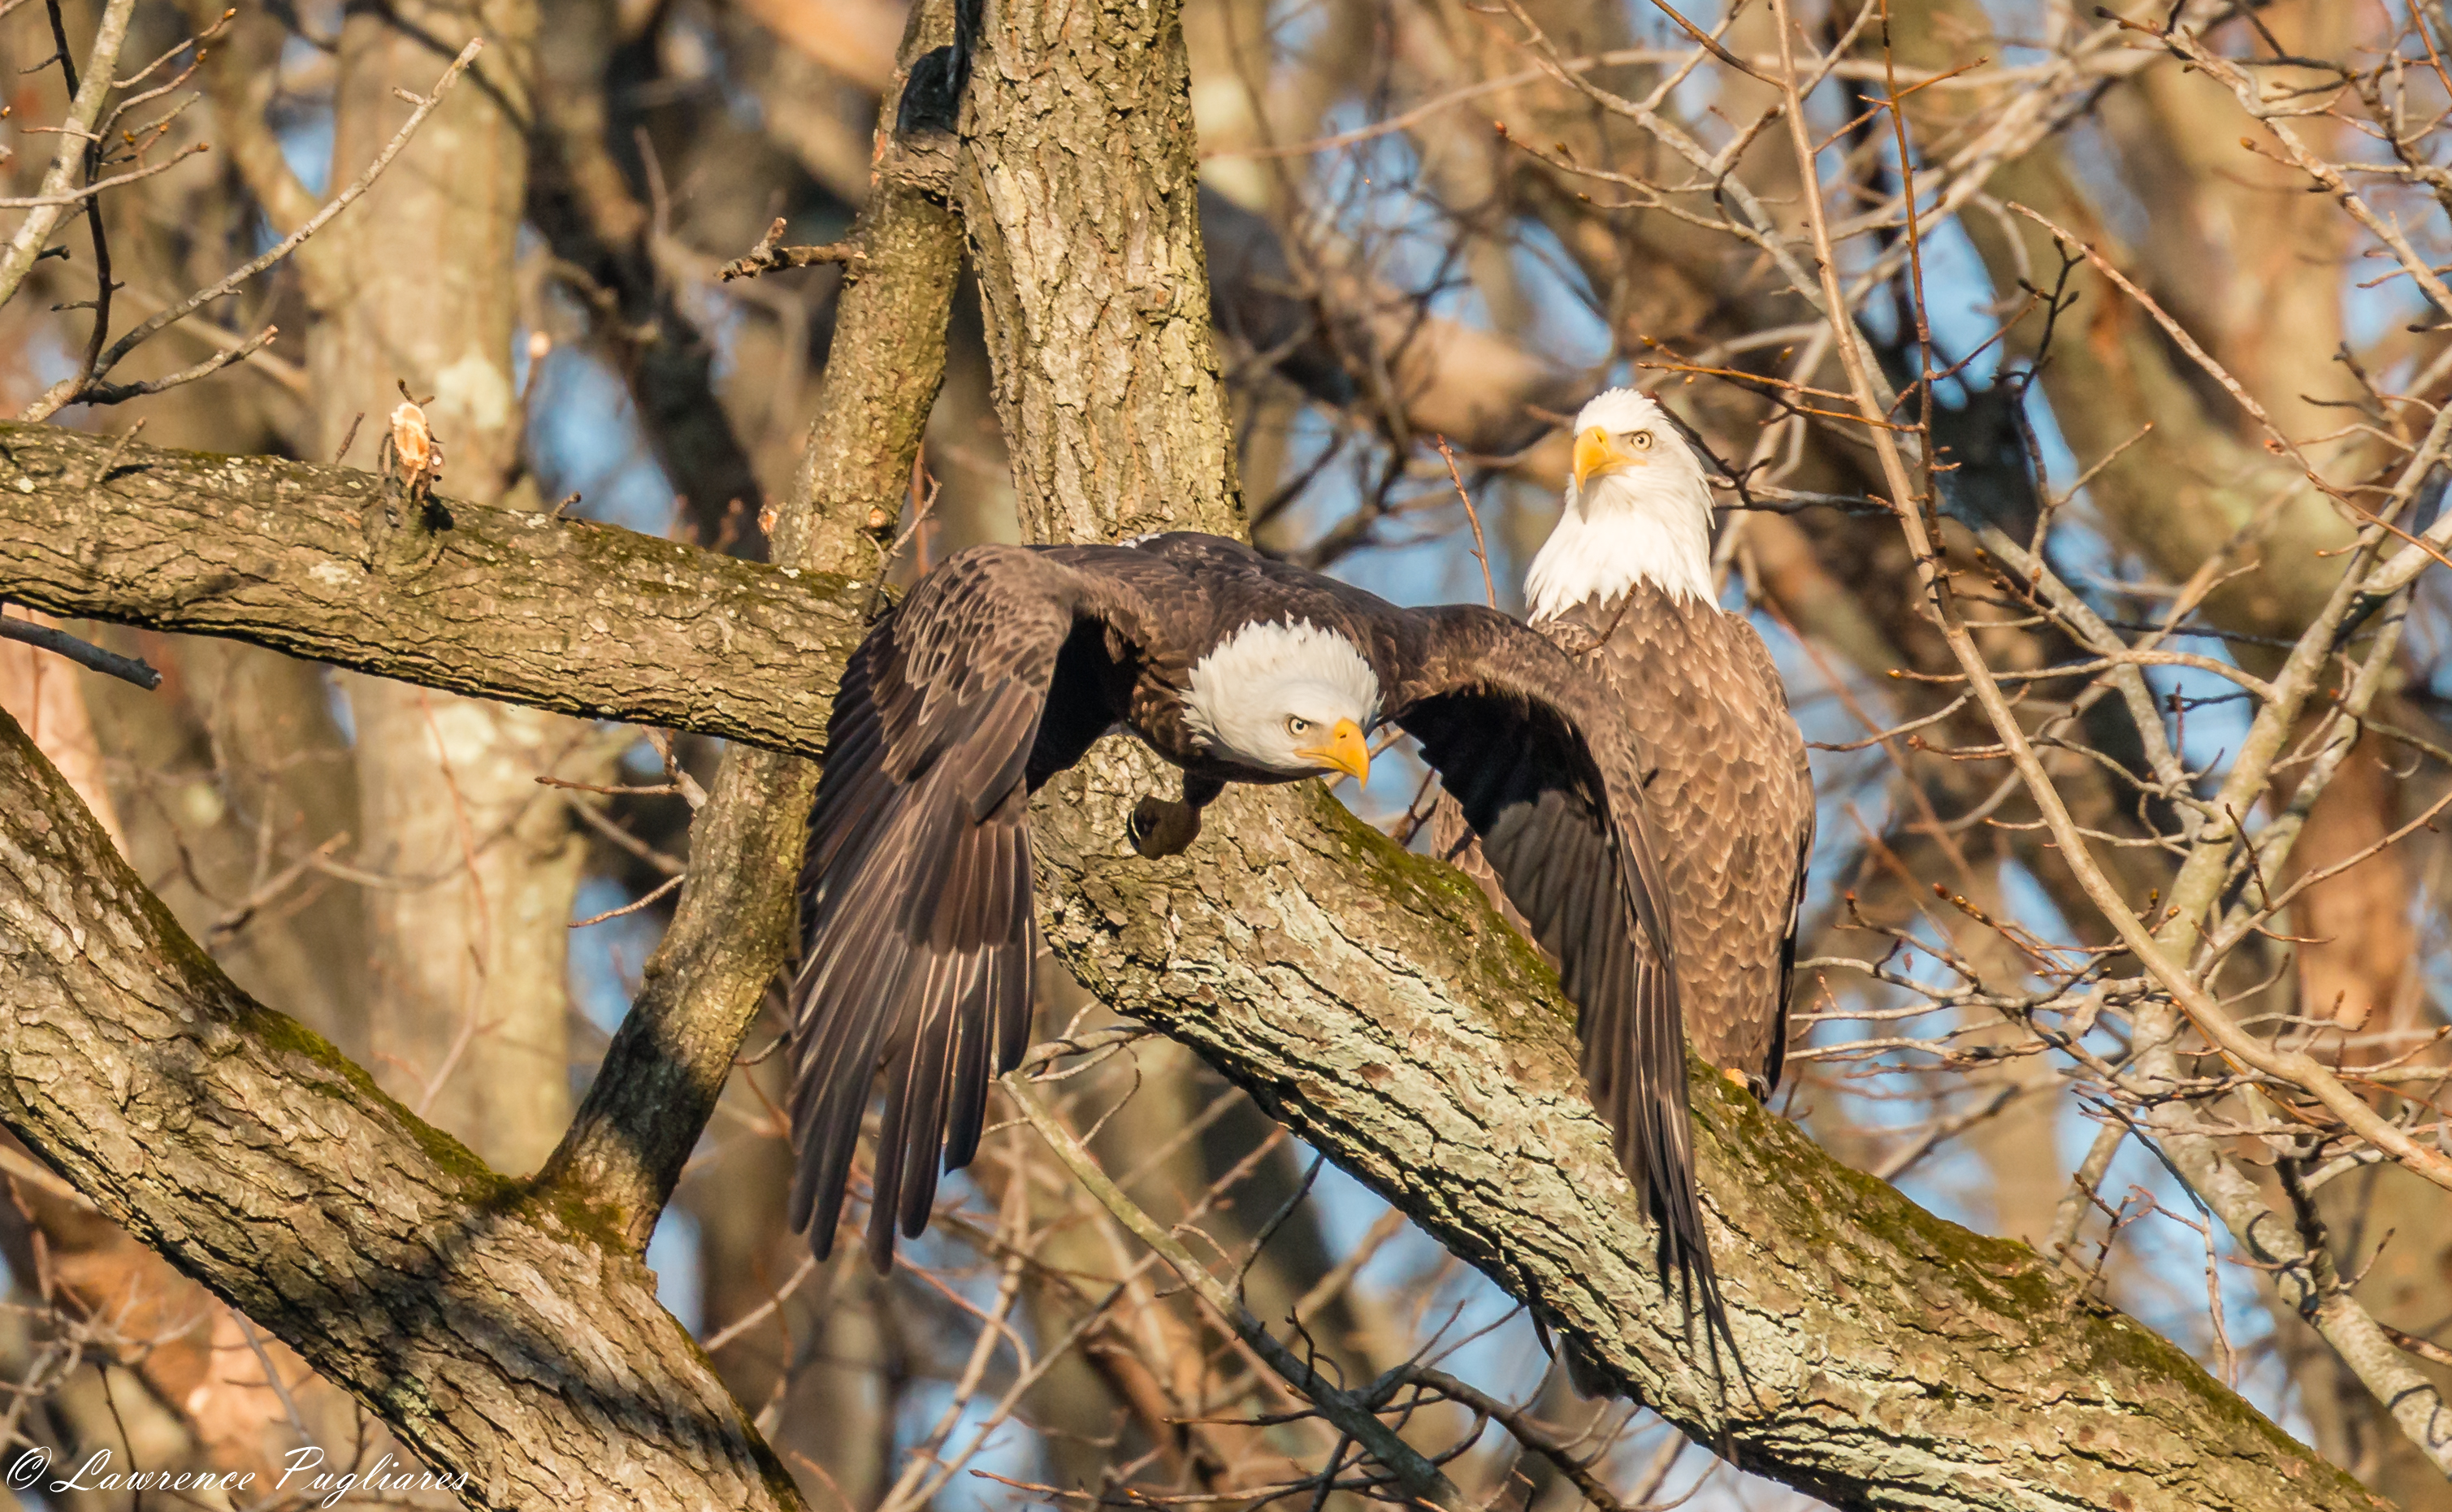 Bald Eagles, which have nested nearby in recent years, make a visit to Wolfe`s Pond Park. Photo: Lawrence Pugliares 